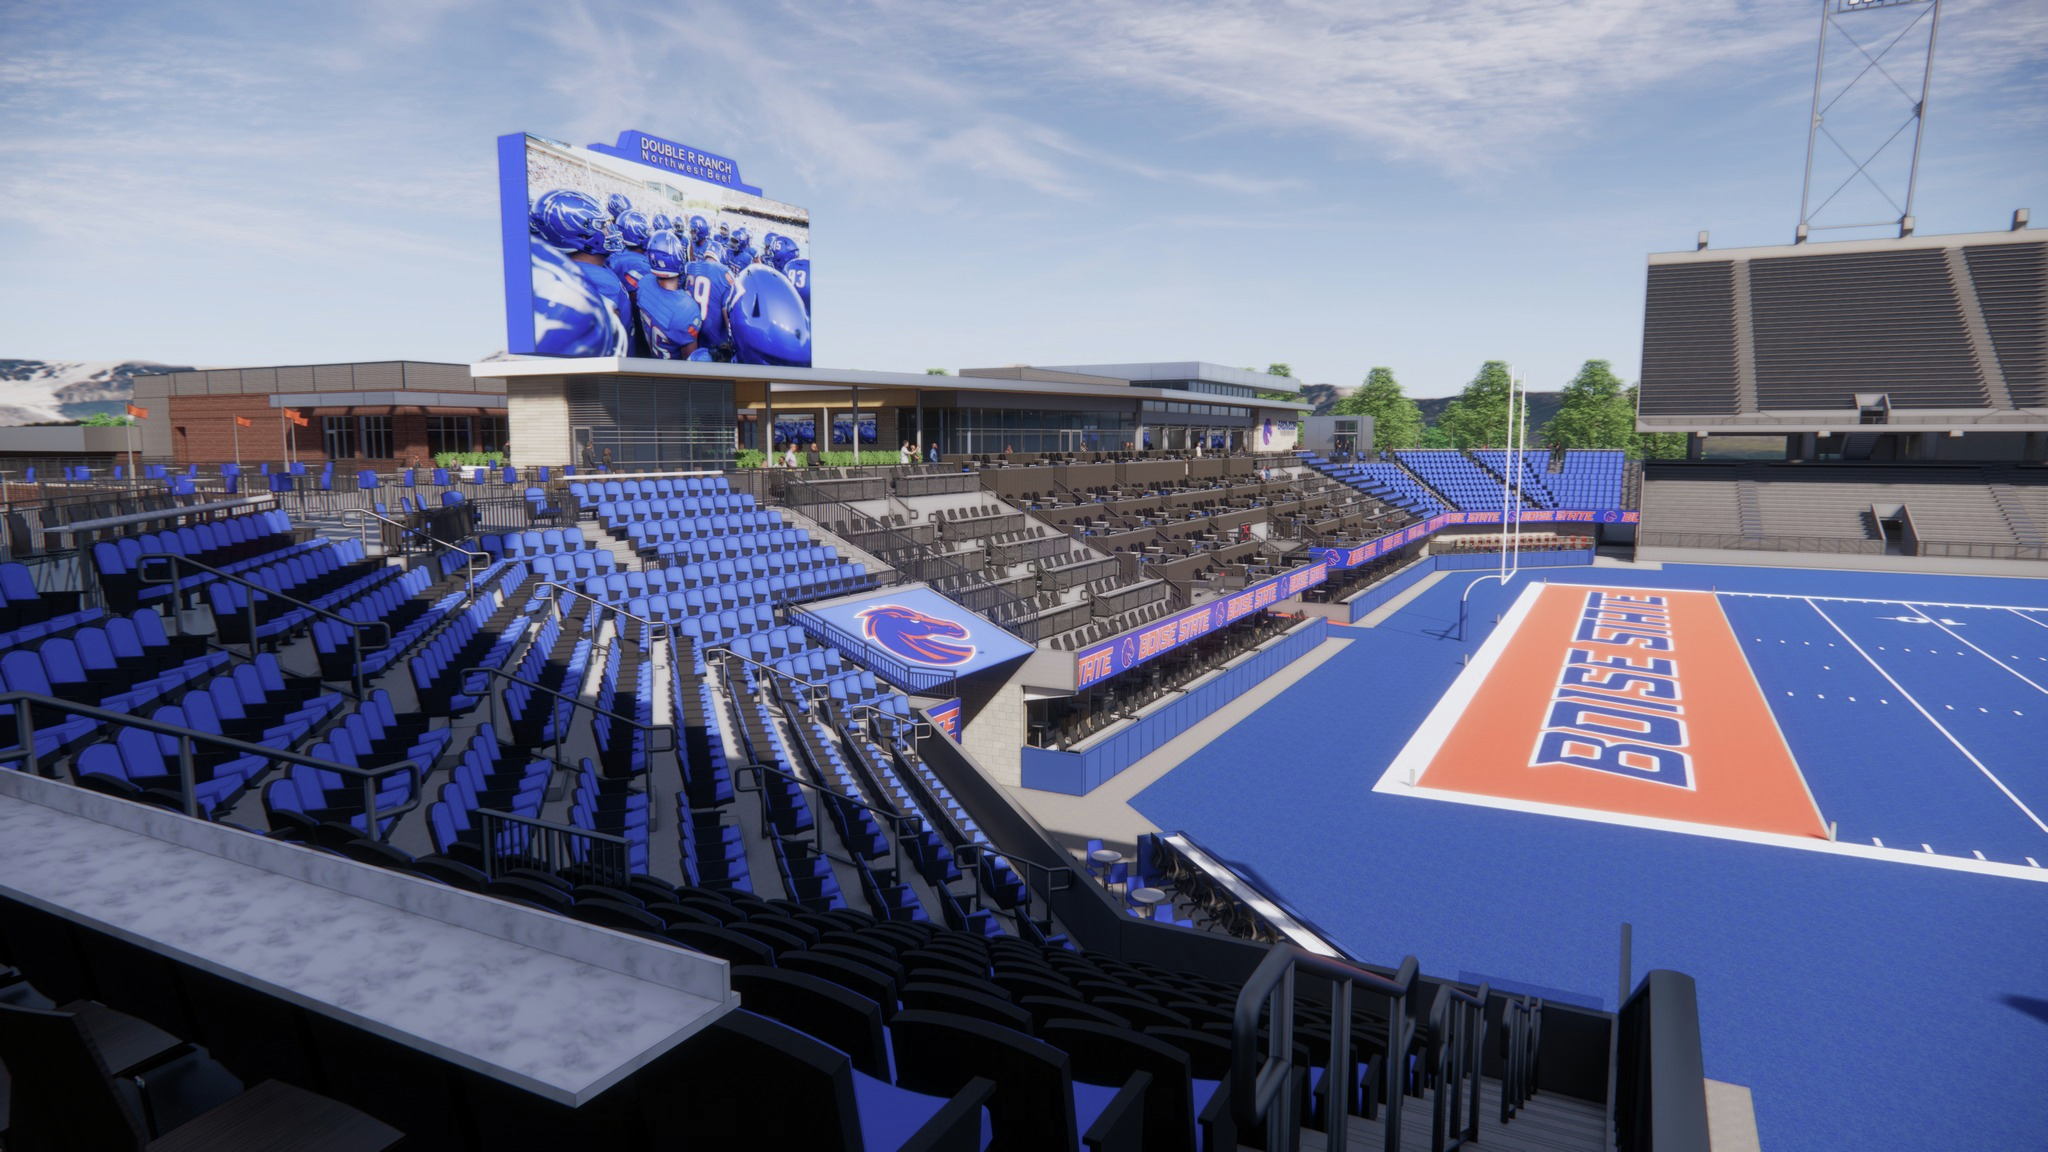 NORTH END ZONE PROJECT: BOISE STATE AD ON CHANGES COMING TO ALBERTSONS STADIUM